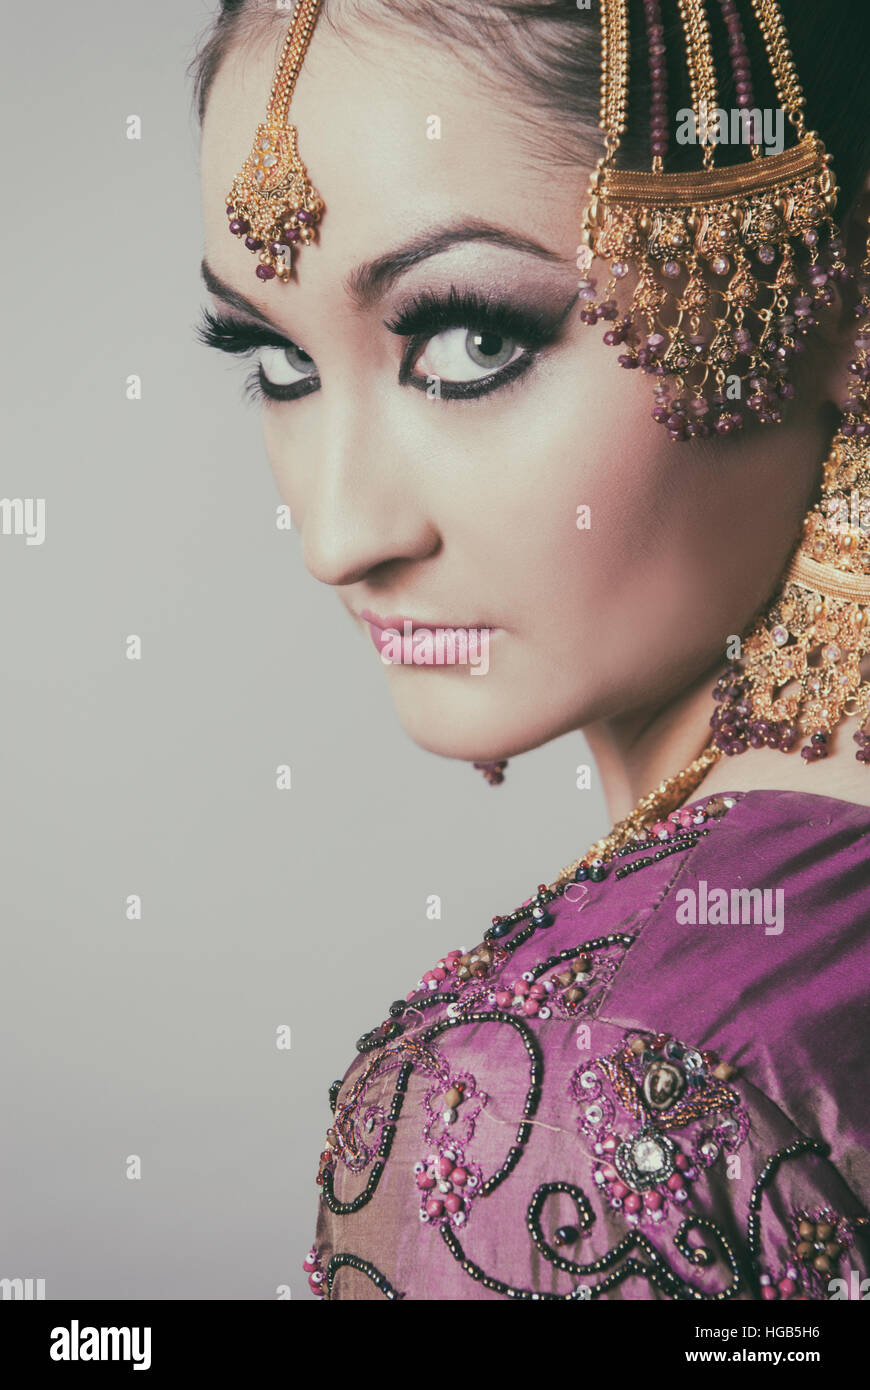 Serious Asian bride looking over shoulder Stock Photo